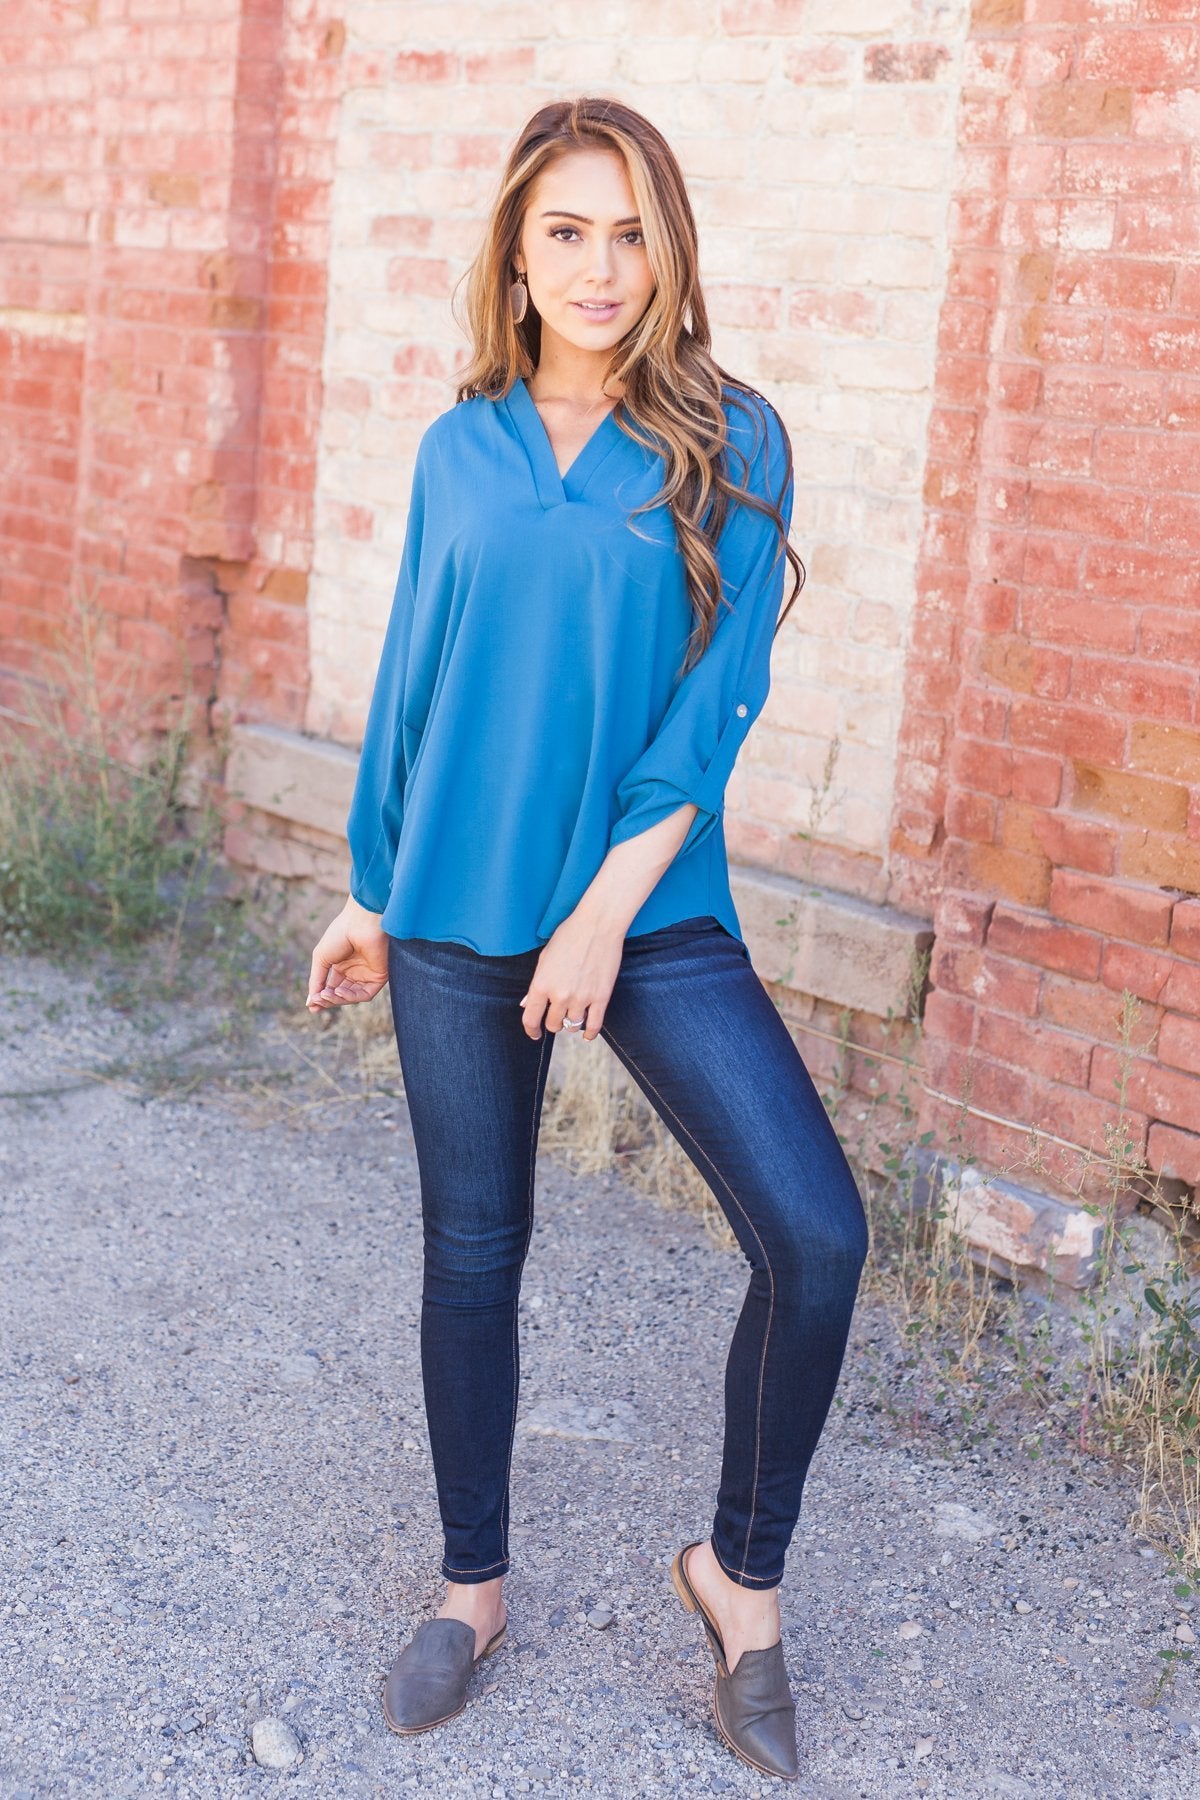 Madeline Mandarin Collared Top In Teal Blue